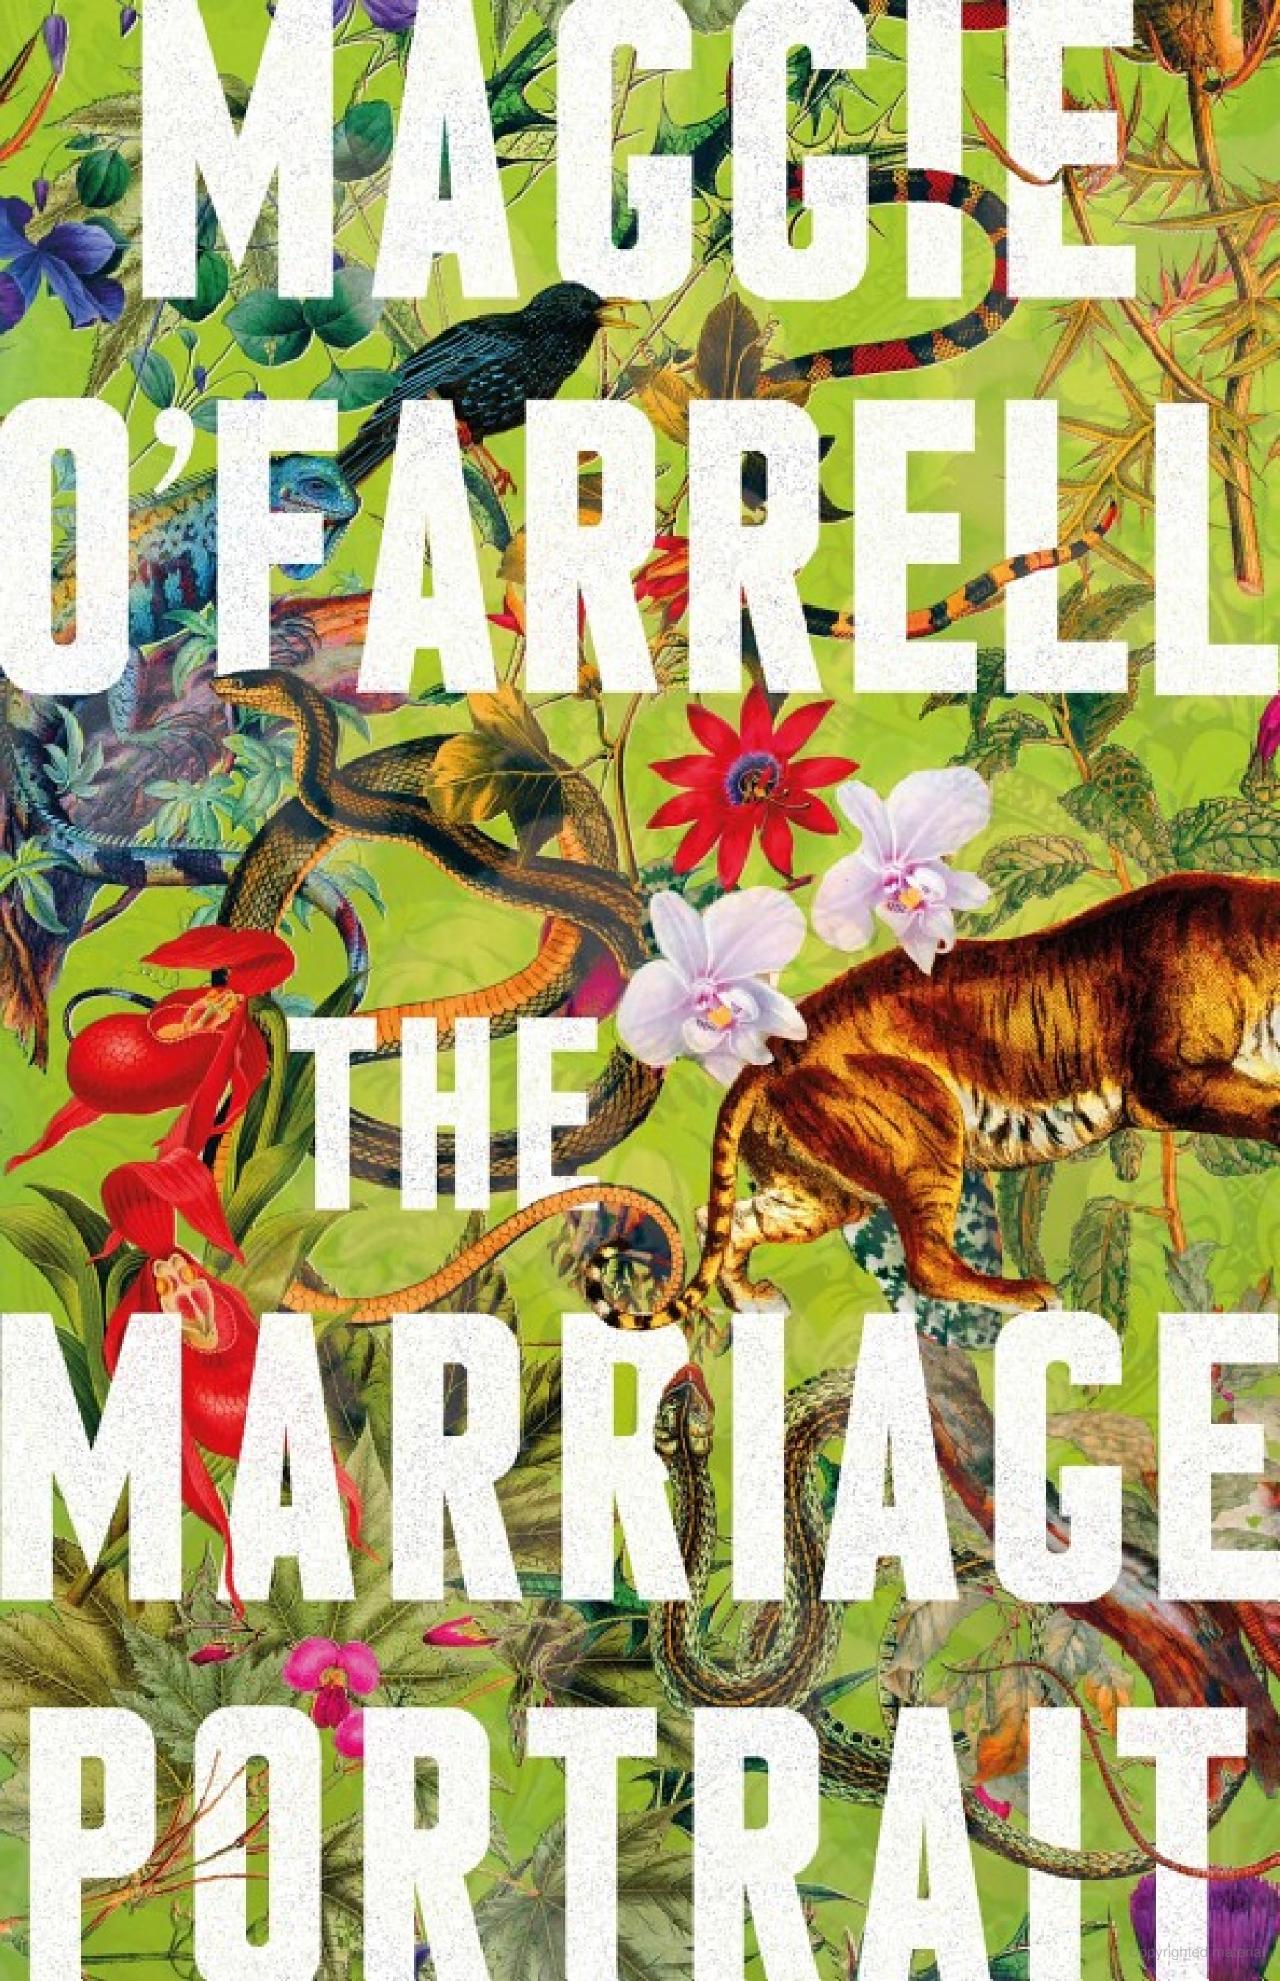 book cover for the marriage portrait with flowers animals in the background and bold text